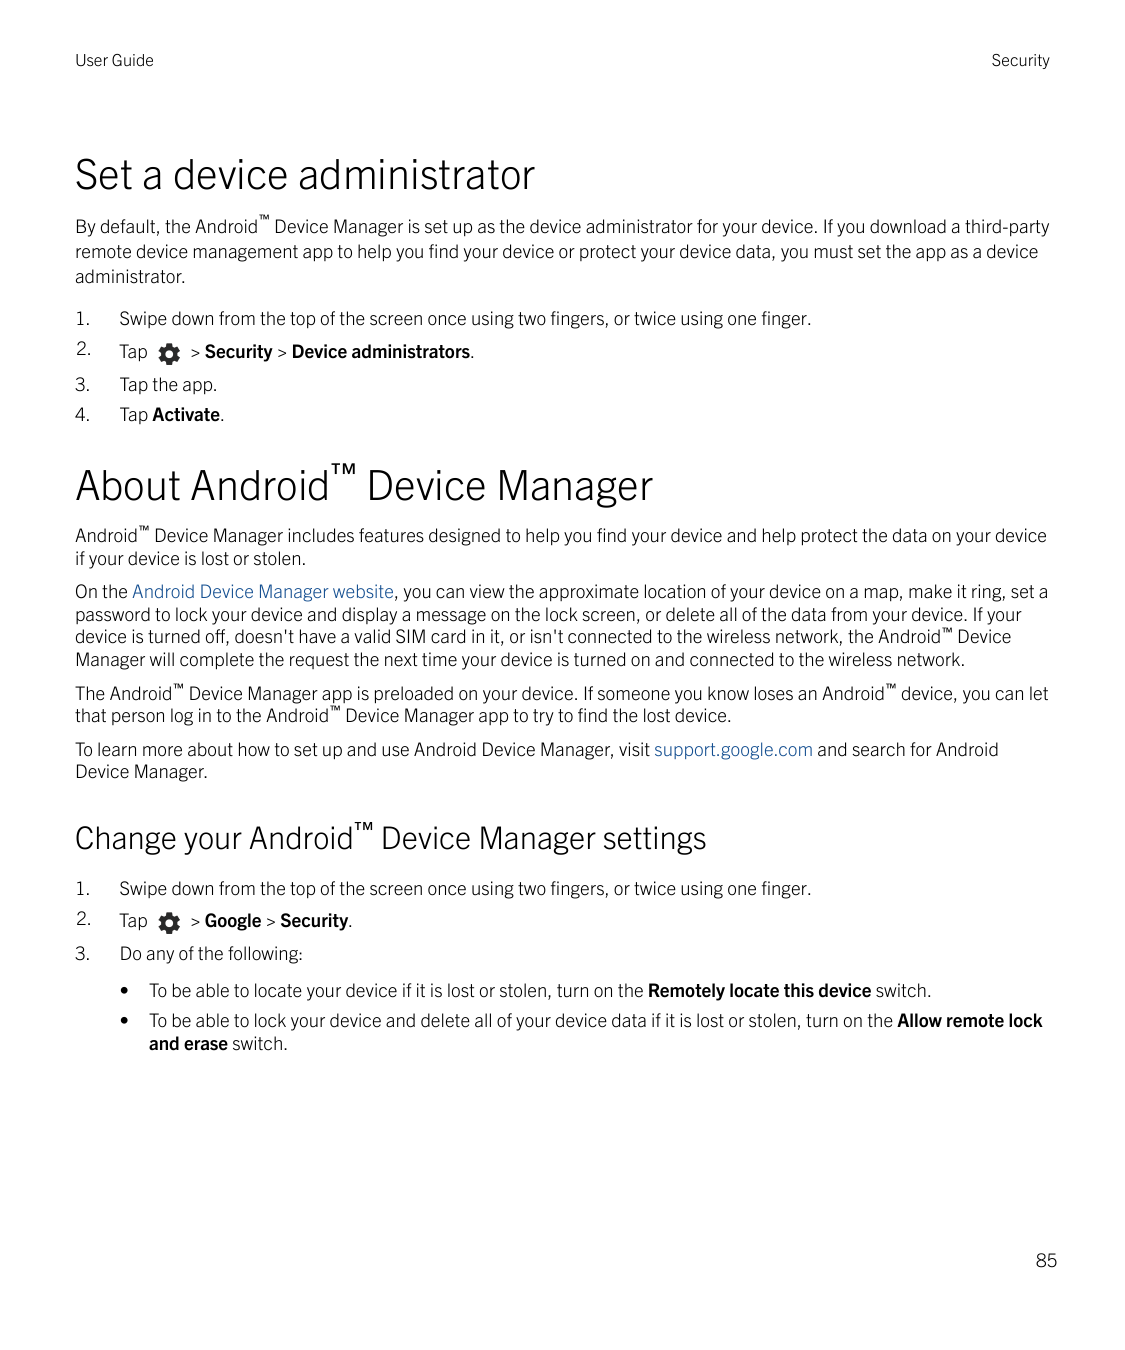 User GuideSecuritySet a device administrator™By default, the Android Device Manager is set up as the device administrator for yo